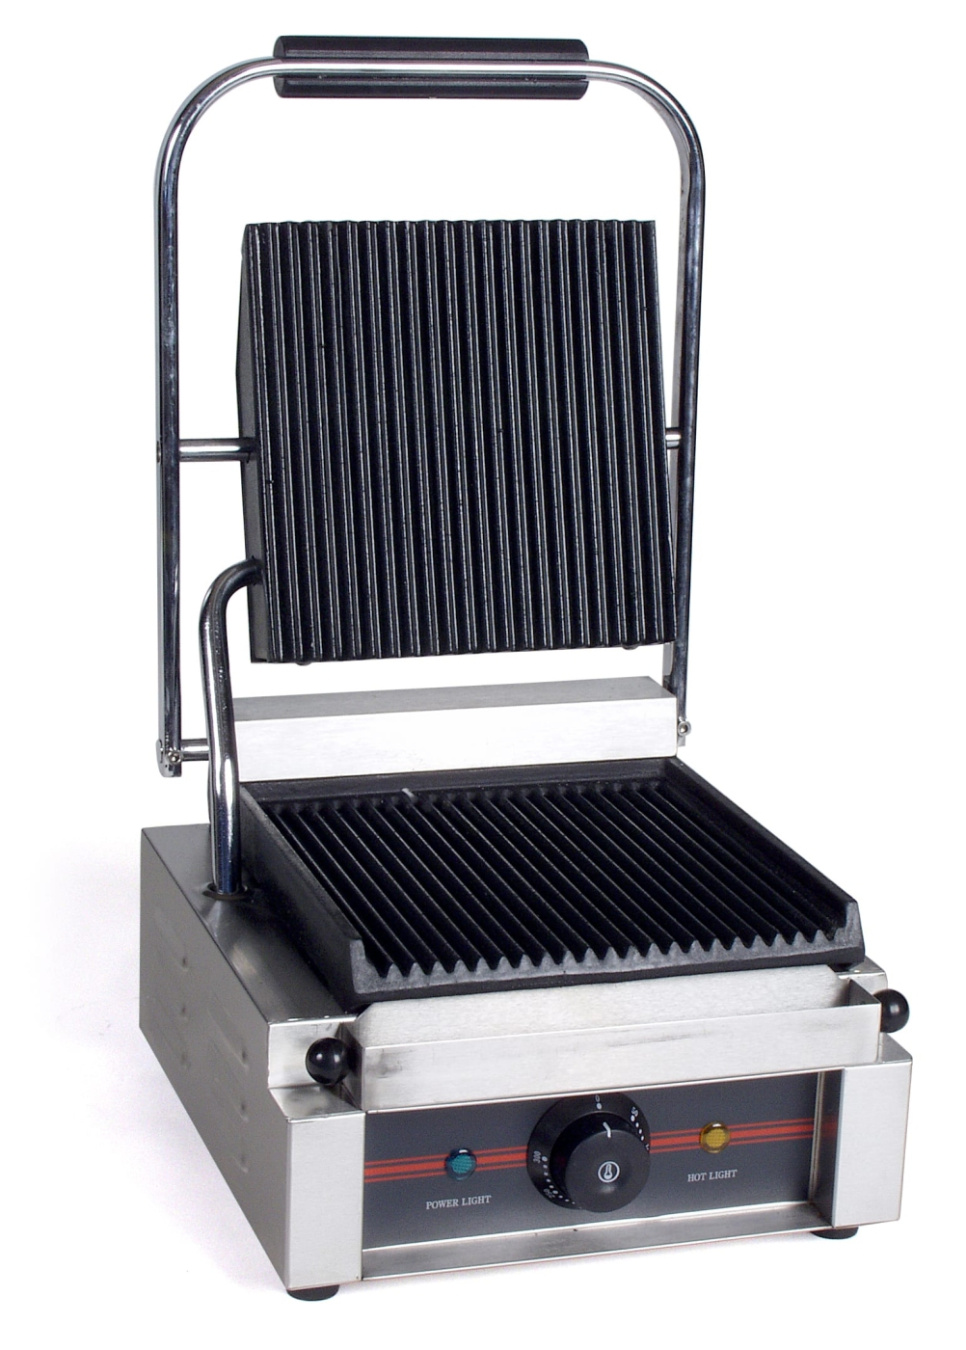 Panini press, grooved cast iron - Merx in the group Kitchen appliances / Heating & Cooking / Panini press at KitchenLab (1071-10961)